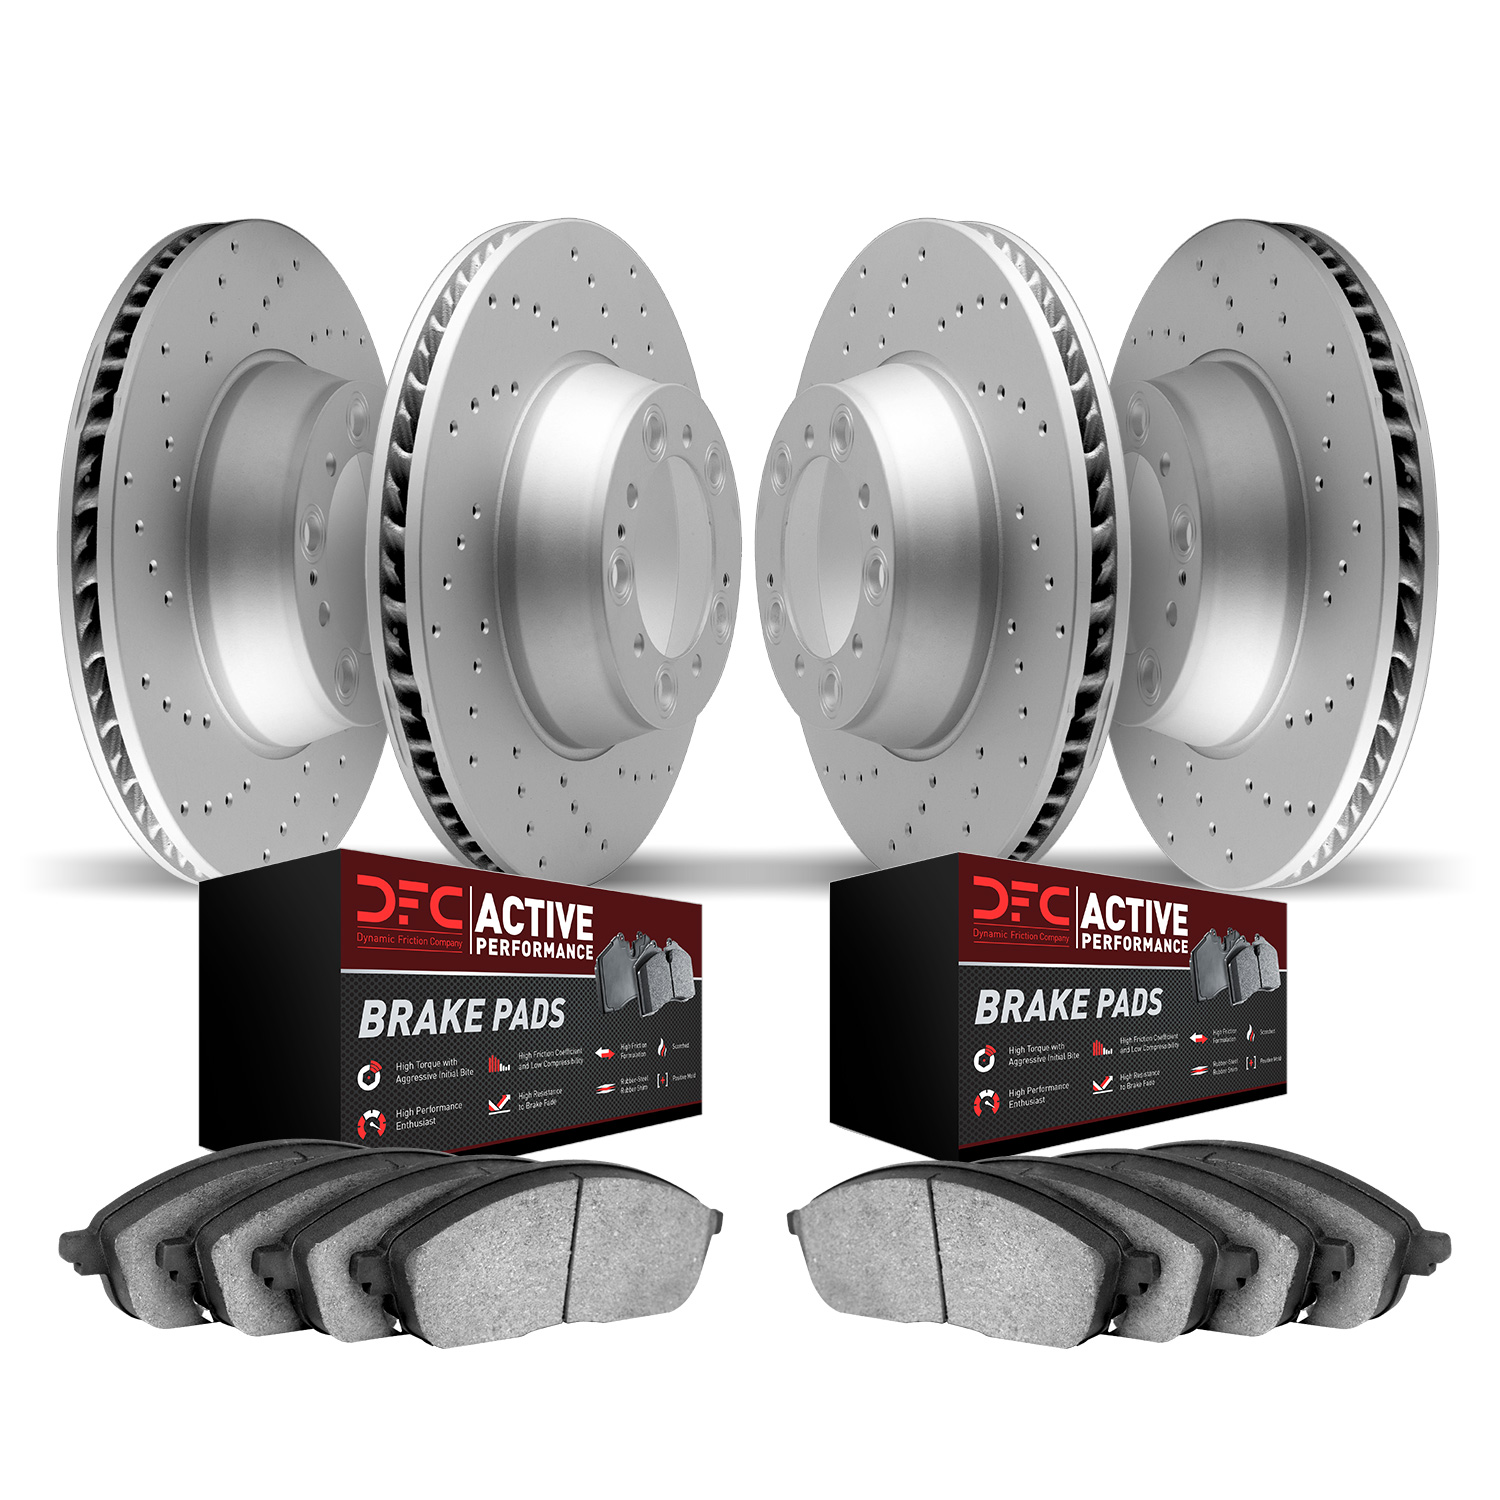 2704-31116 Geoperformance Drilled Brake Rotors with Active Performance Pads Kit, 2004-2006 BMW, Position: Front and Rear